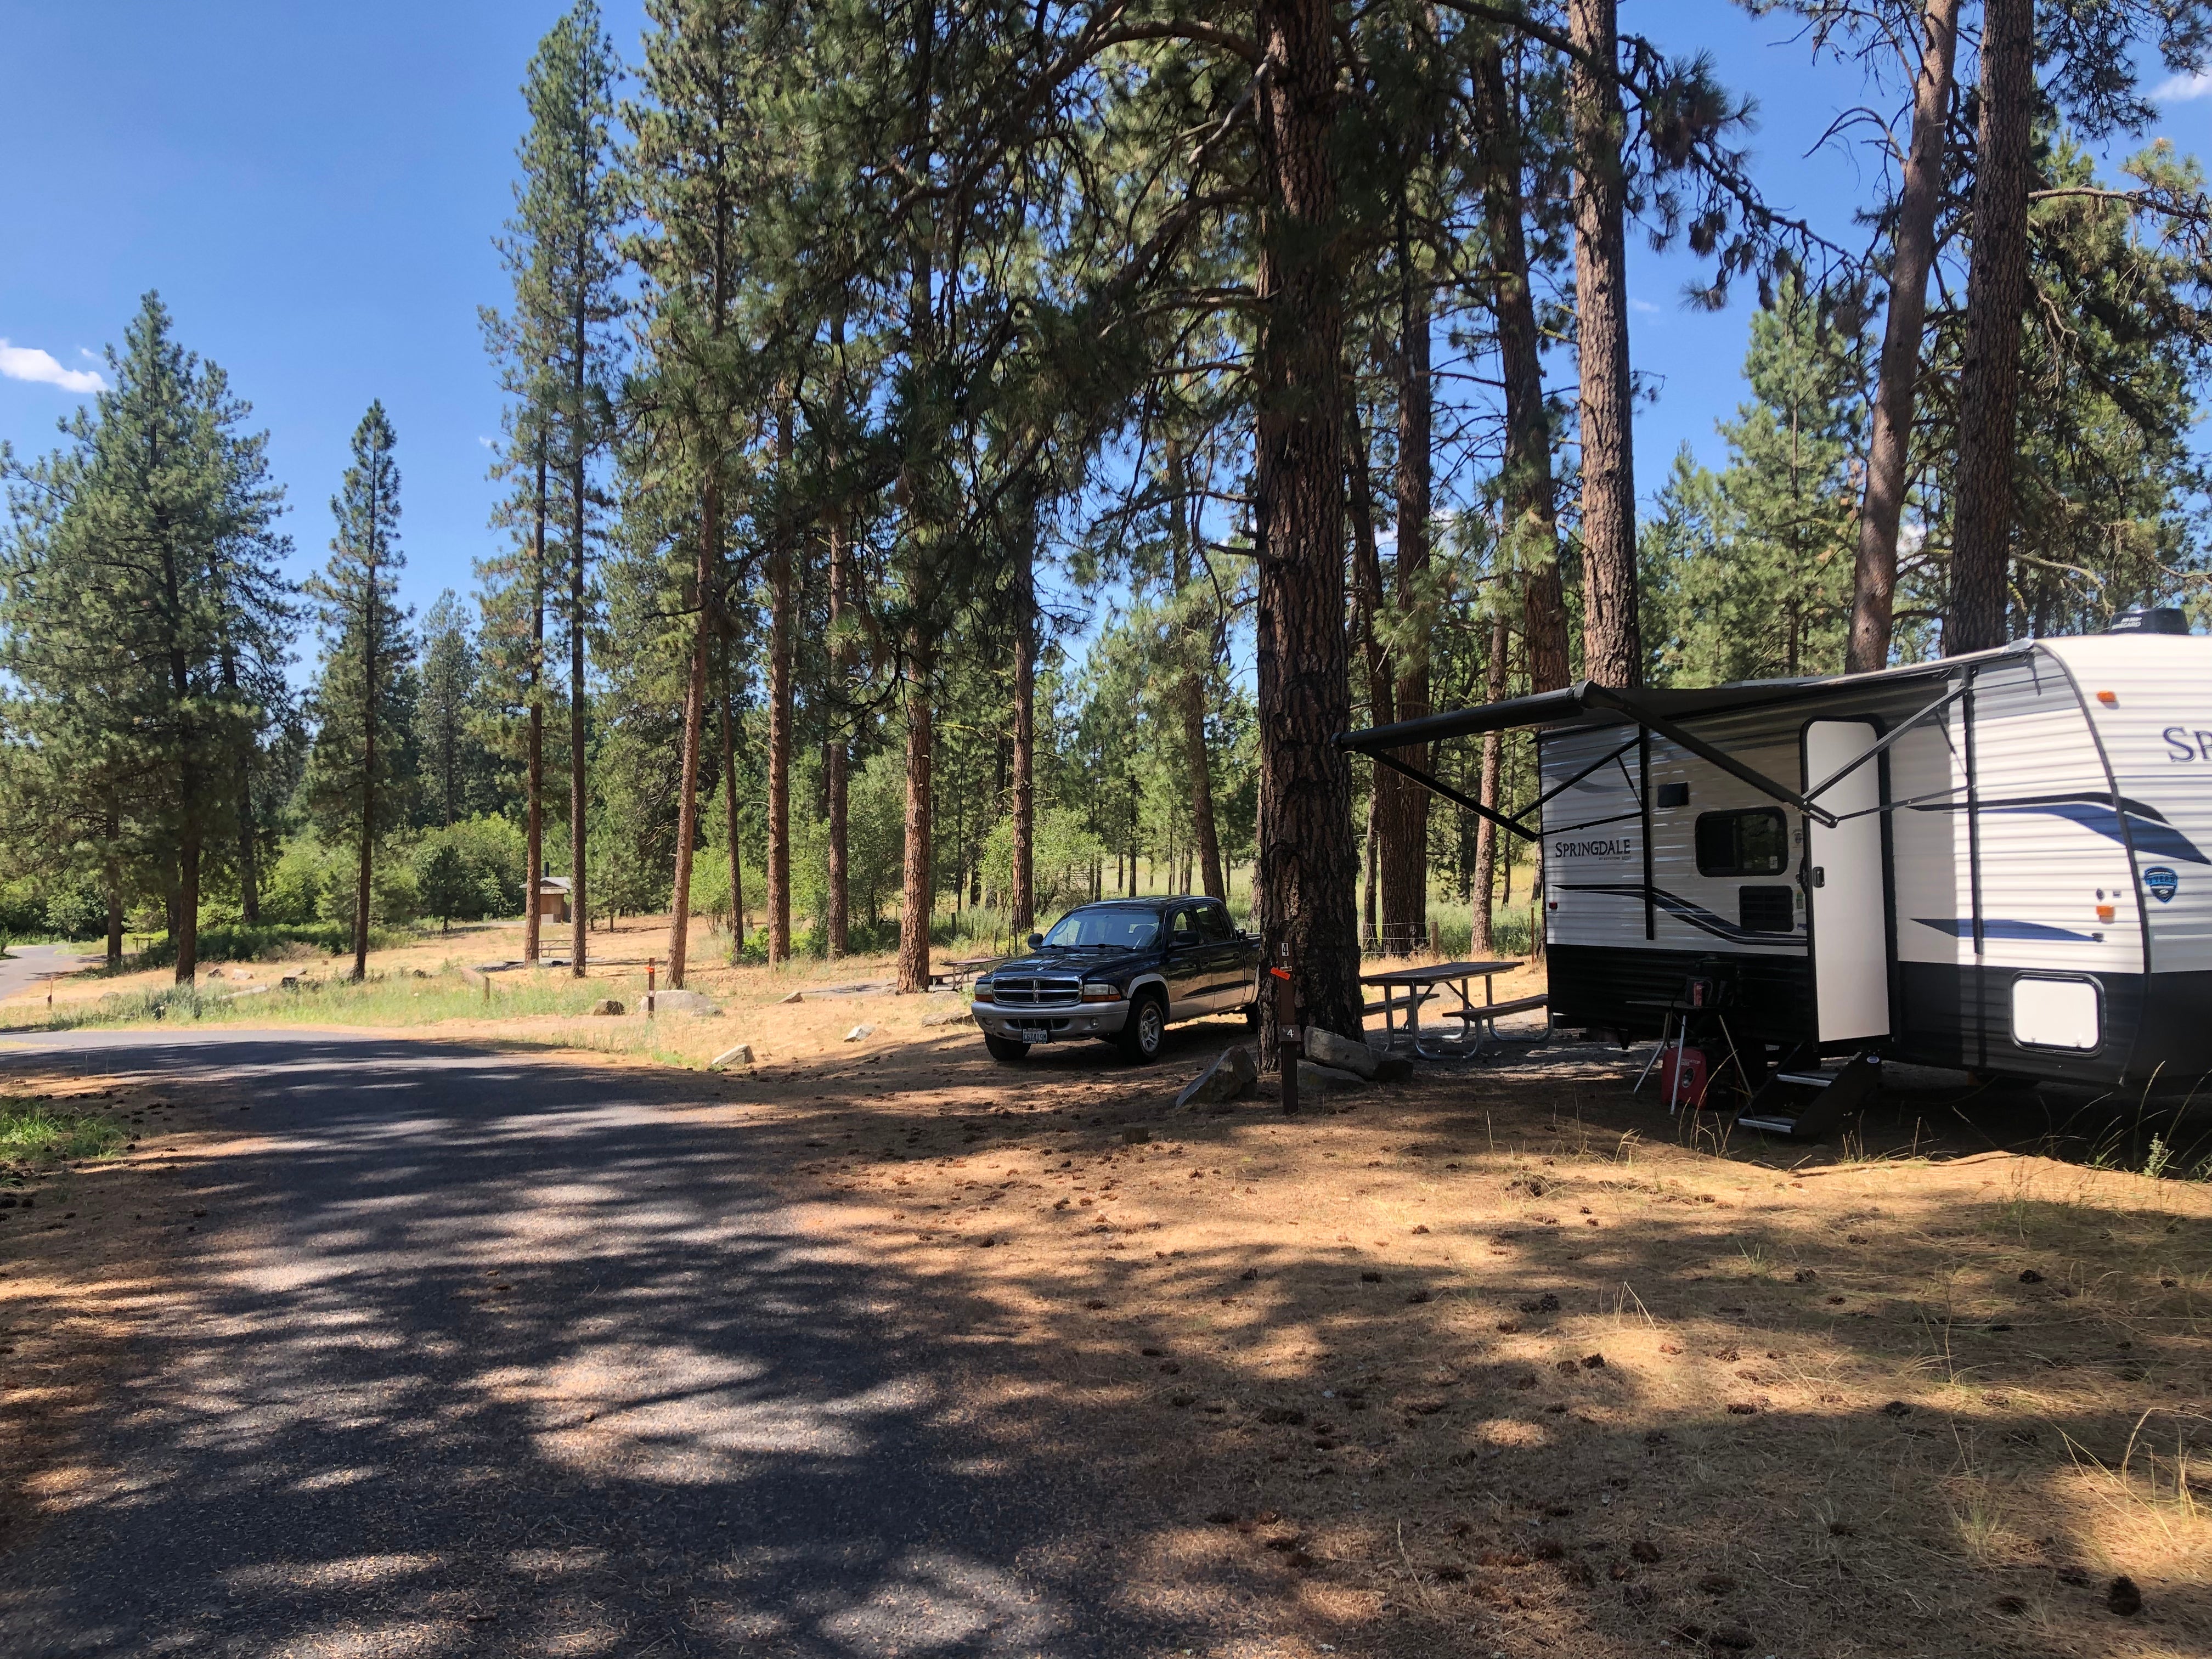 Camper submitted image from Dragoon Creek Campground - 1